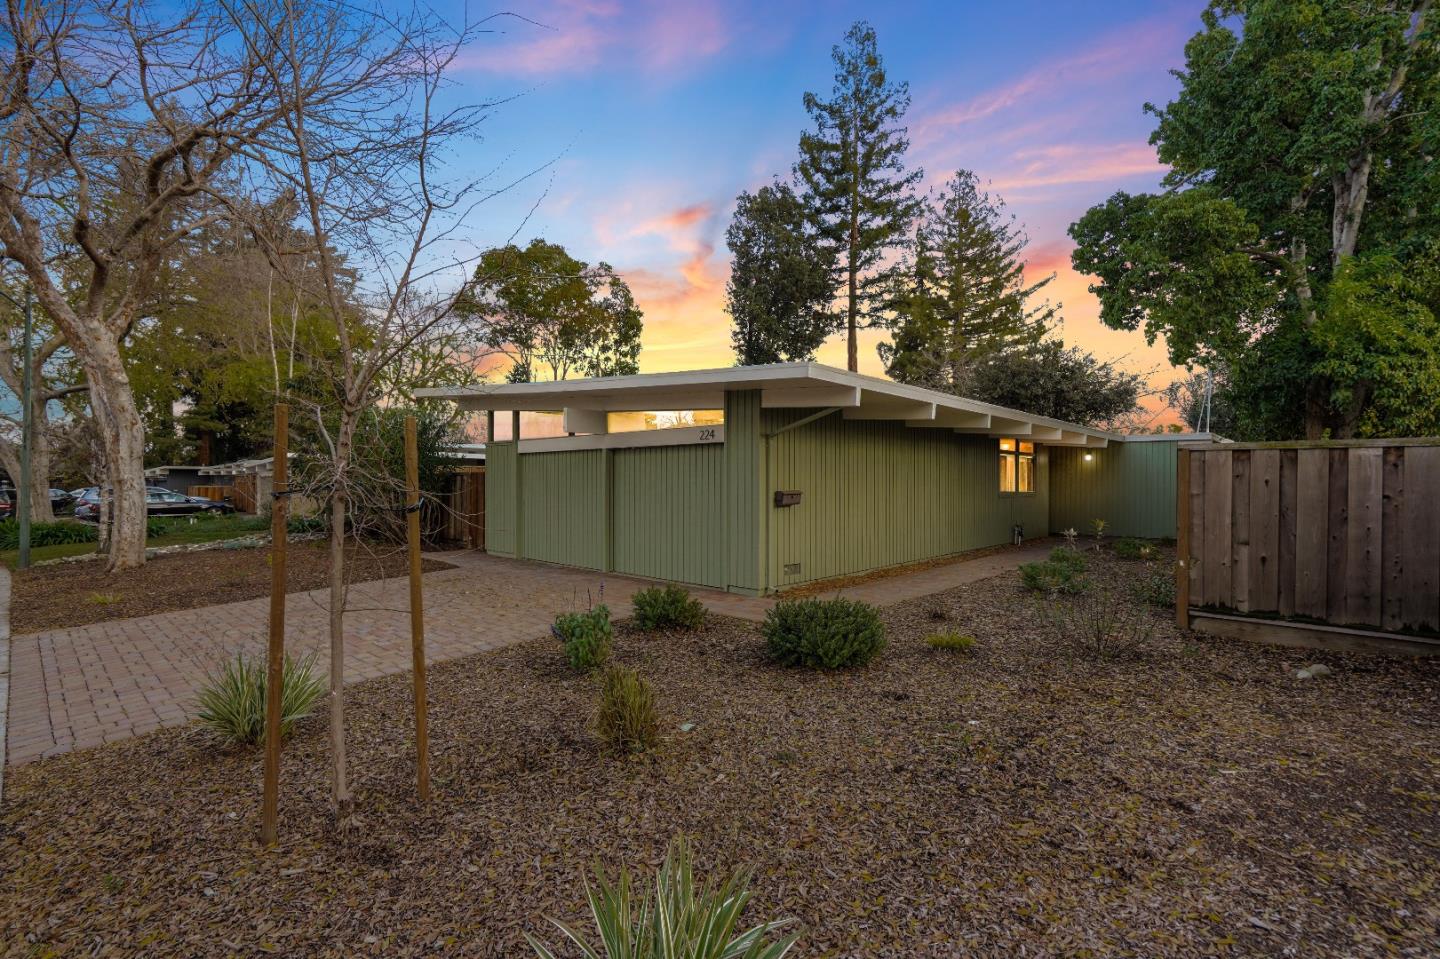 This Greenmeadow Eichler home is located on a quiet cul de sac adjacent to the park and Greenmeadow Community Association Rec Center and pool. In 2021, the kitchen and bathrooms were updated, new flooring was installed, the roof was replaced, and the interior repainted. Sited on a 7051sf lot (per County Assessor), this property offers plenty of space for expansion and outdoor use.